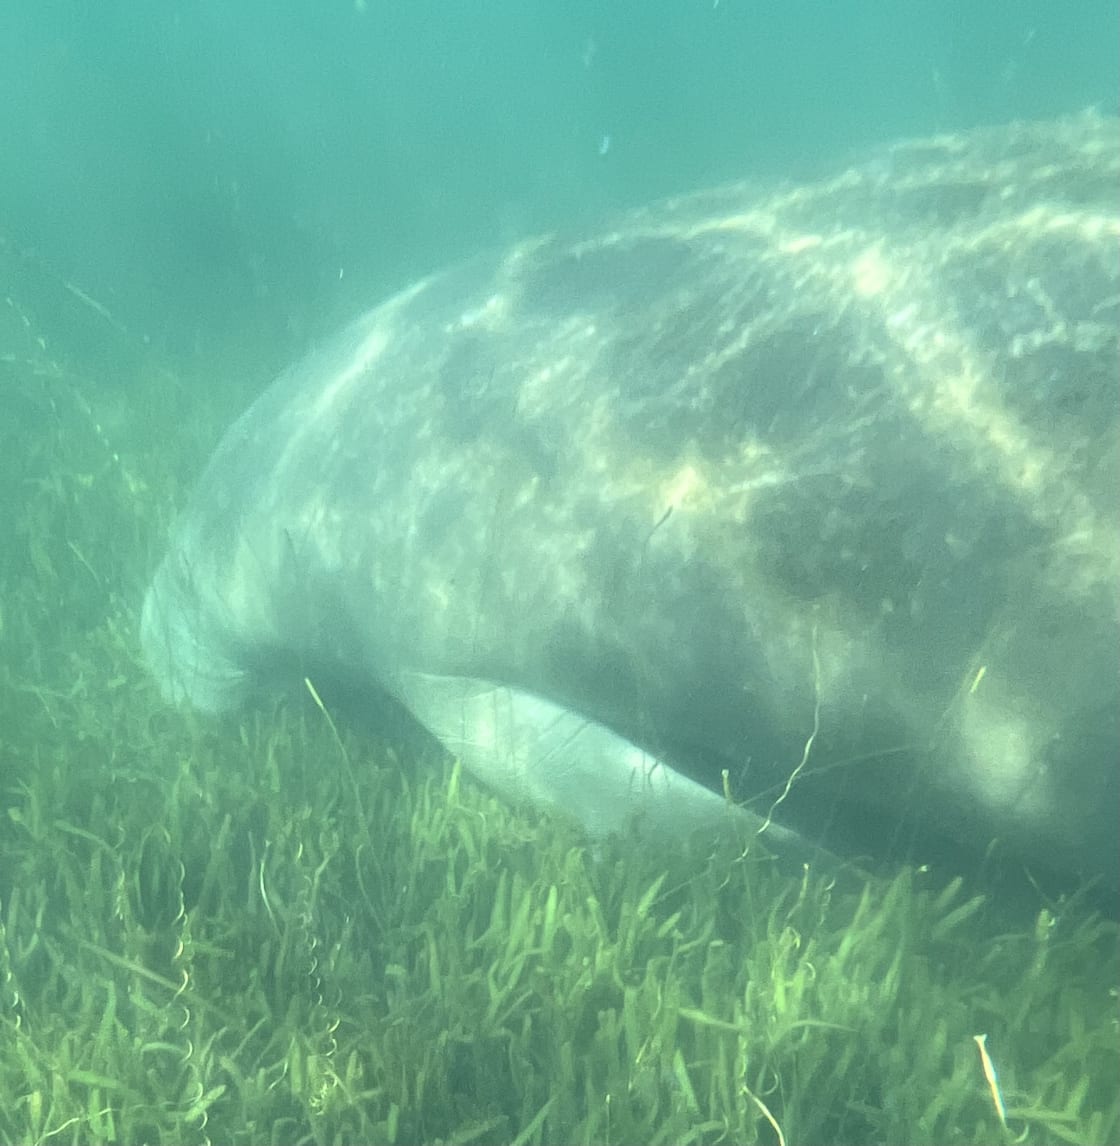 Snorkeling with the manatees